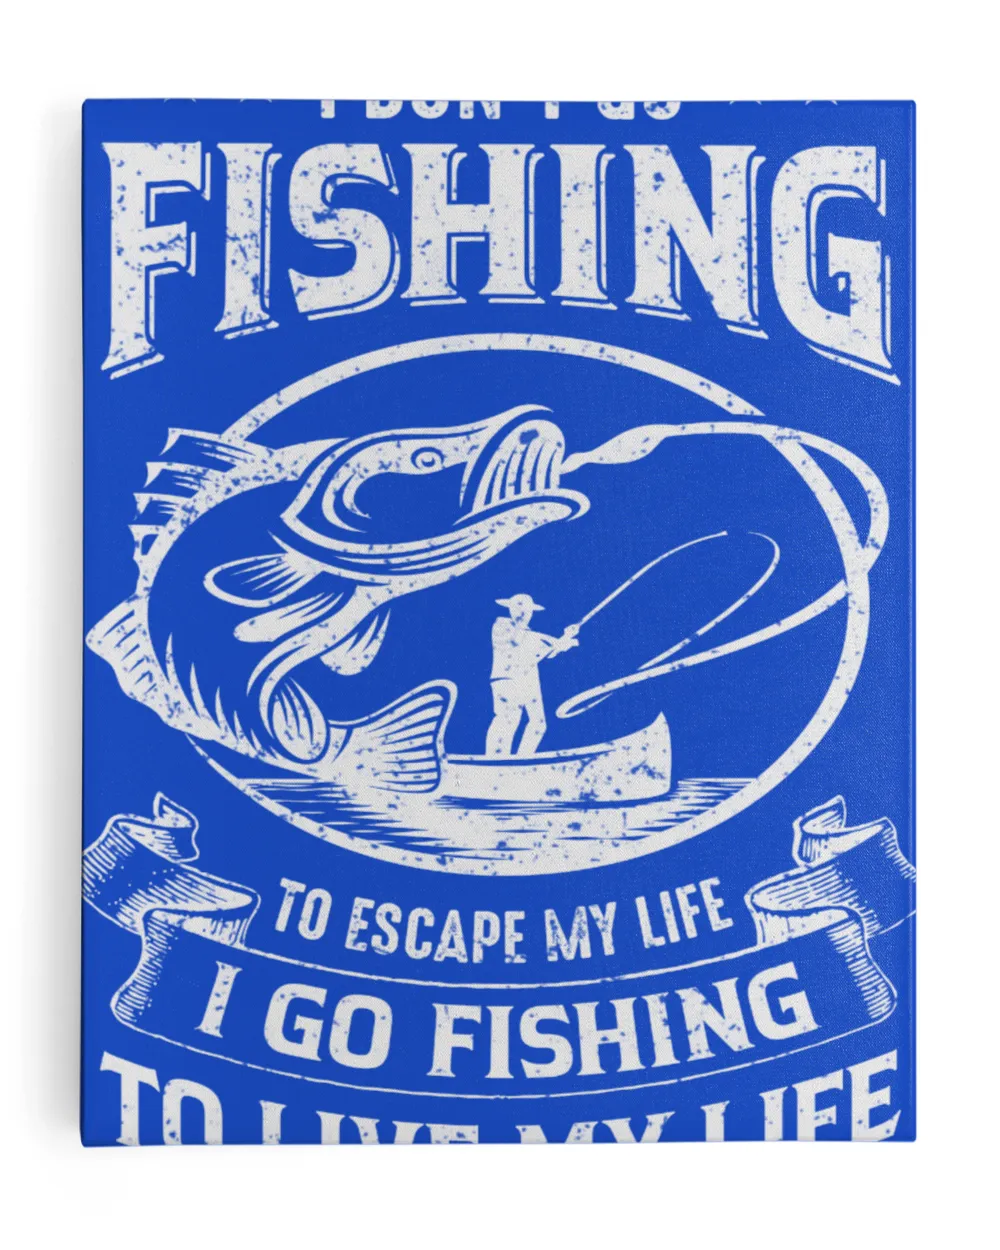 I Go Fishing To Live My Life